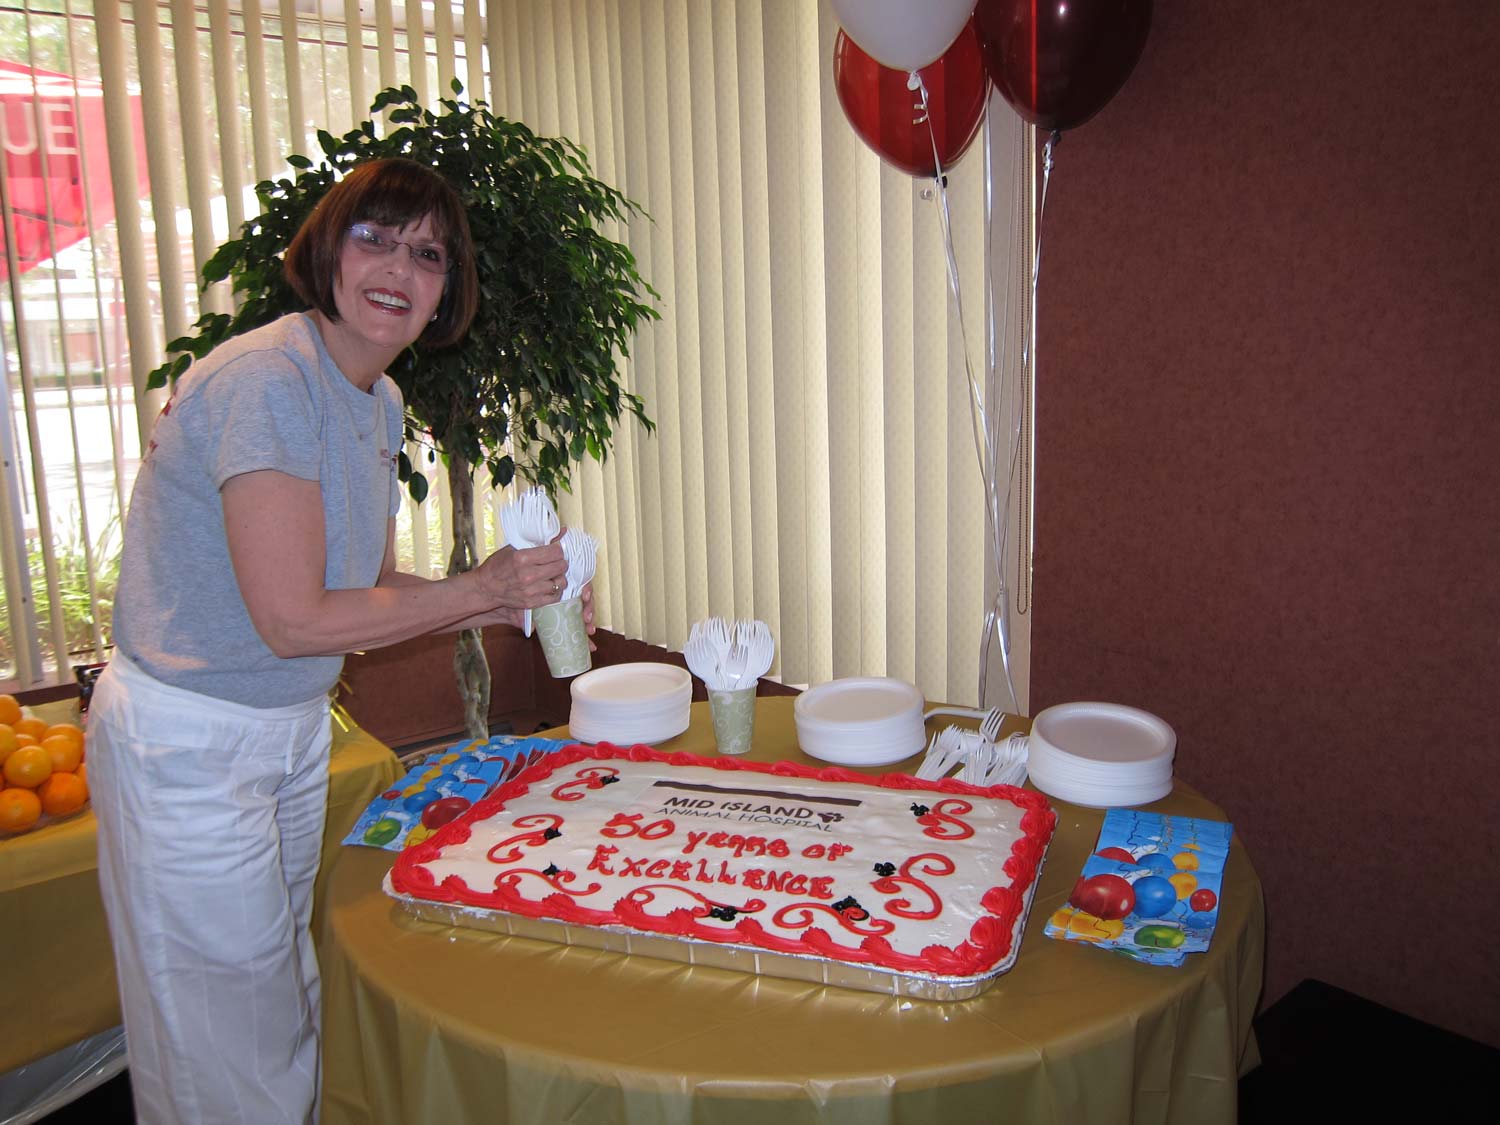 a person standing next to a table with a cake